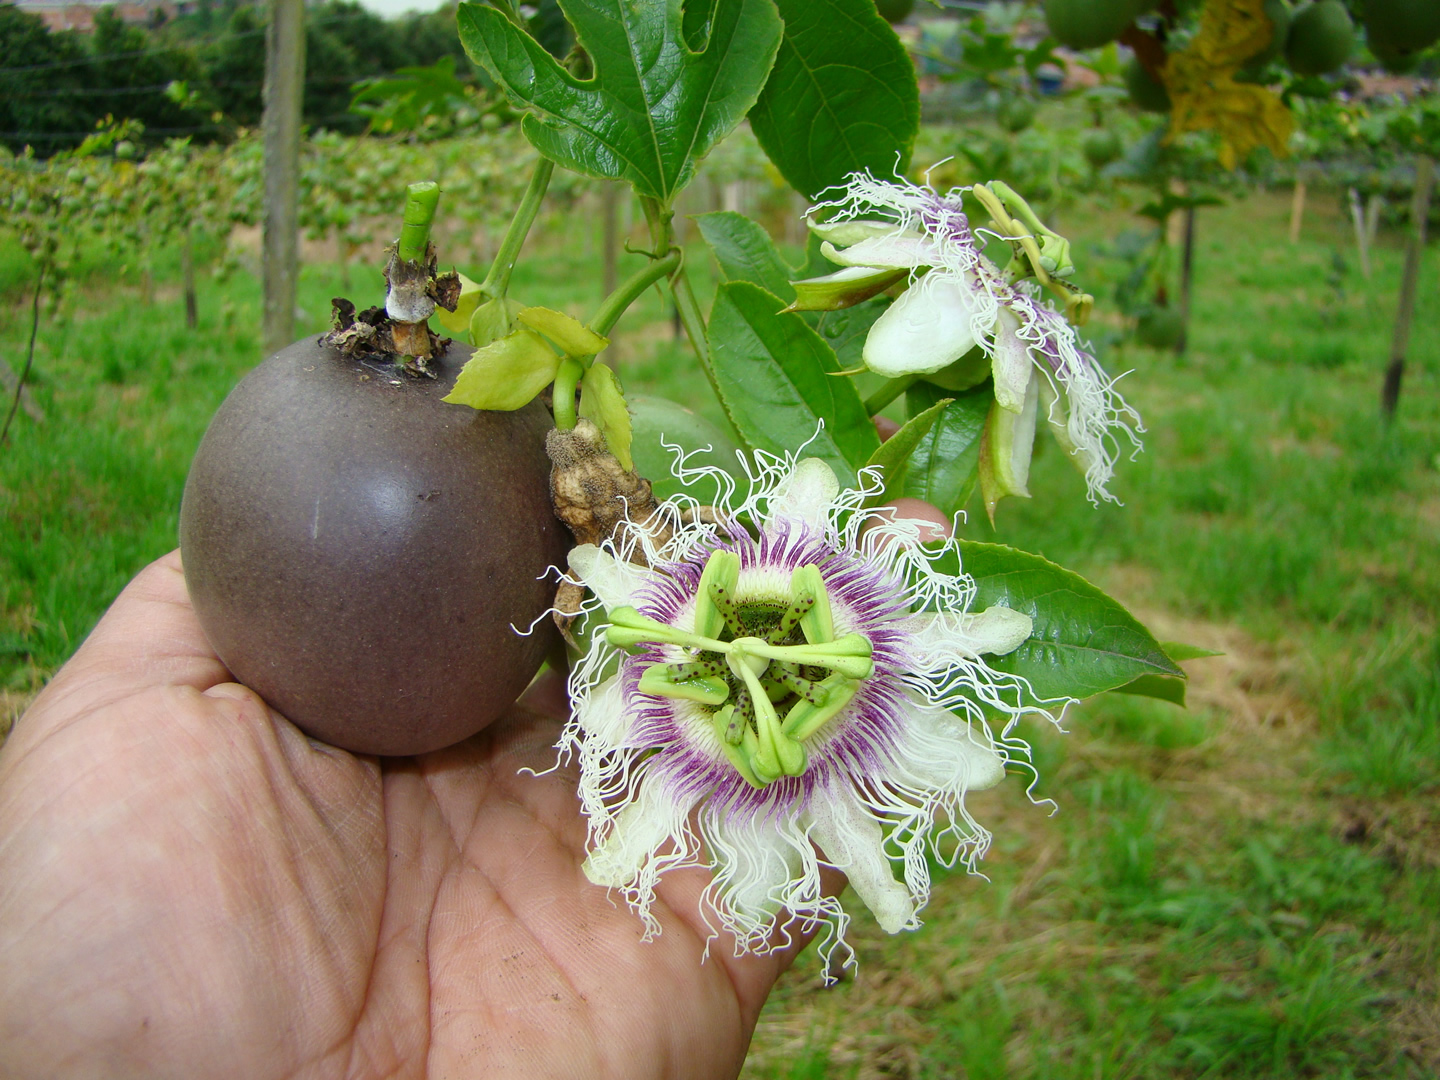 Native purple passion fruit is the key to exporting elite fruits